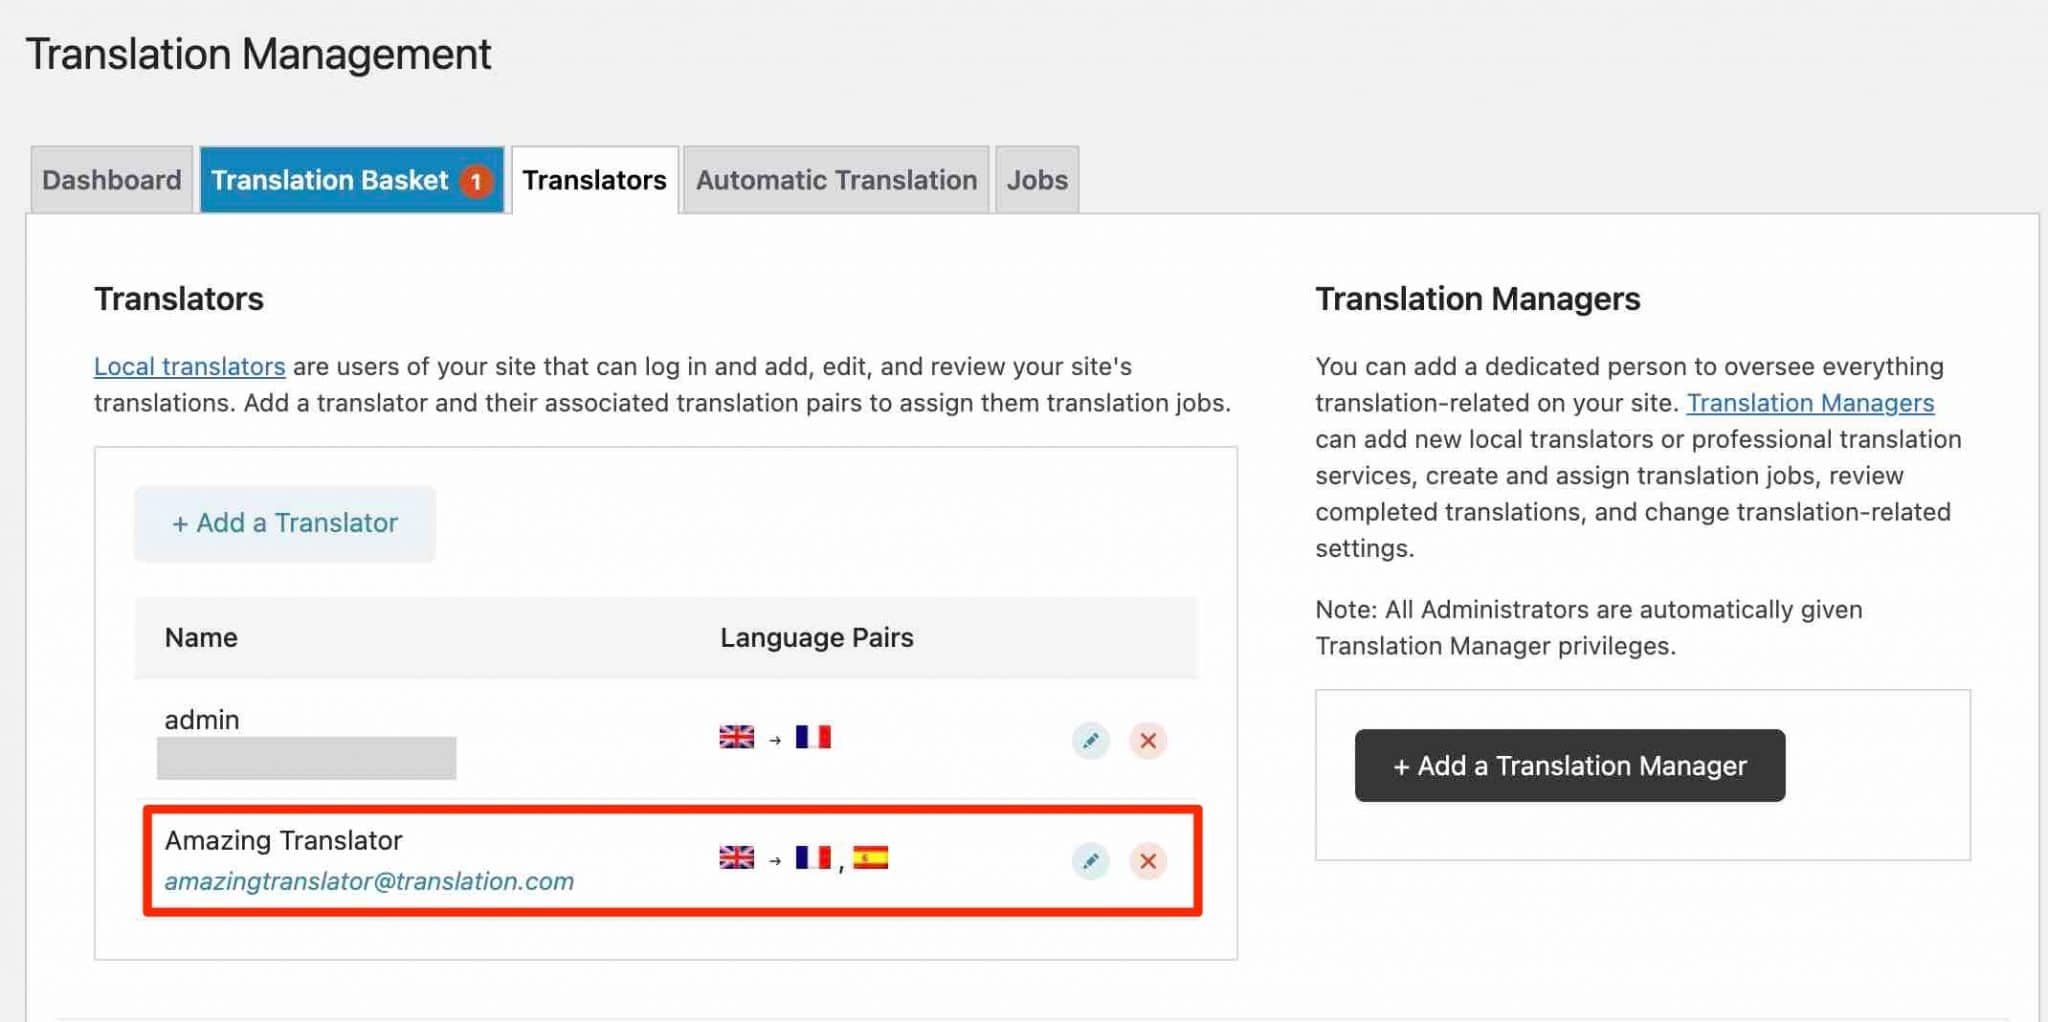 WPML allows translation by other types of users.